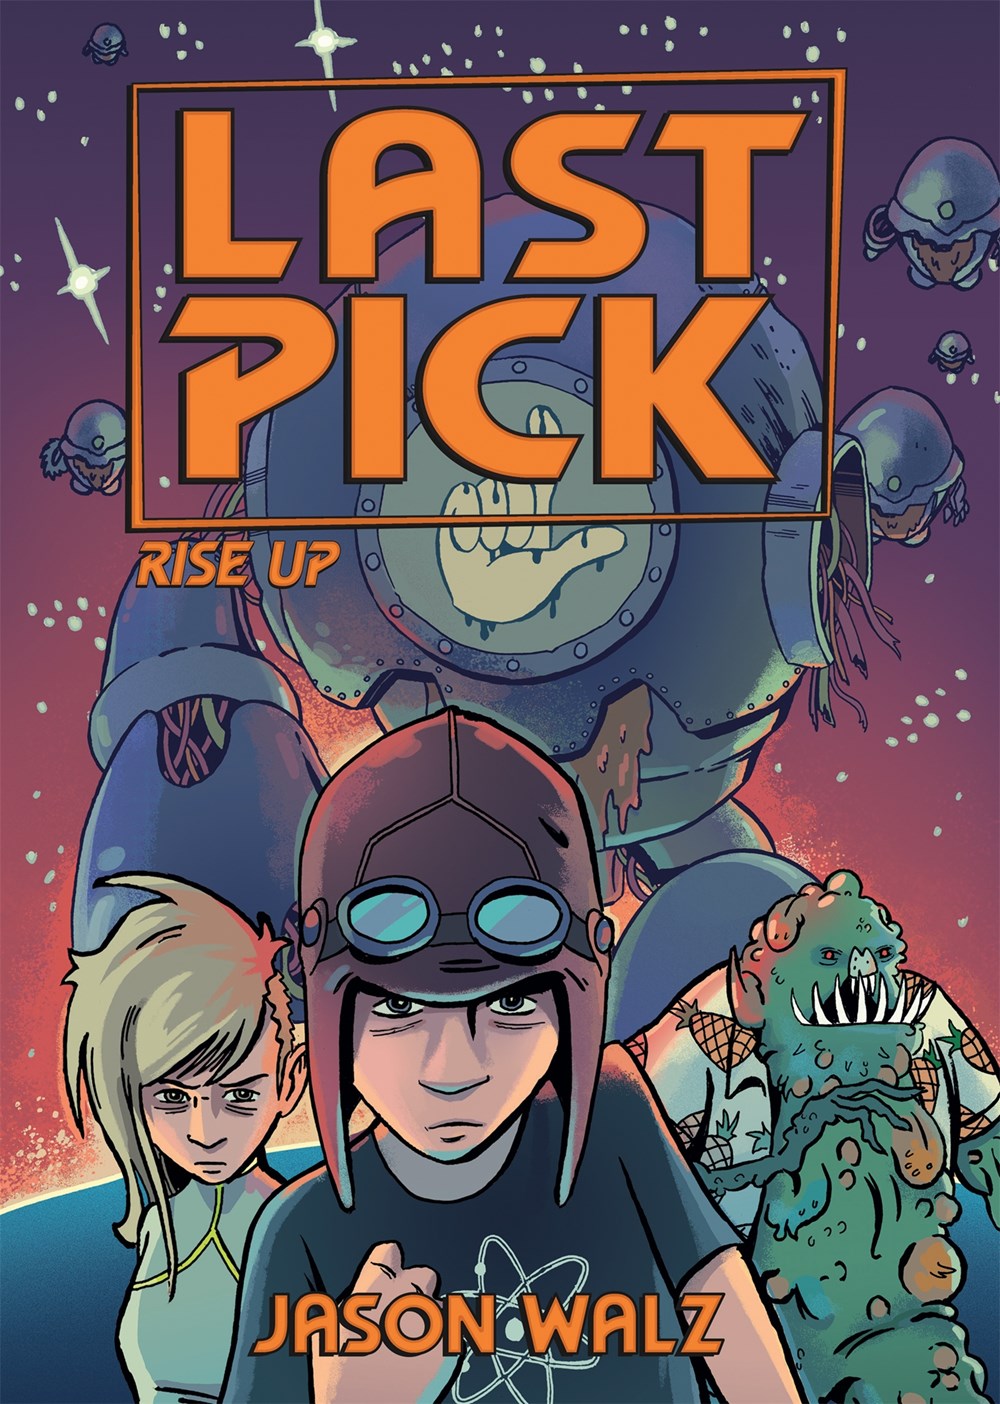 Book Last Pick: Rise Up